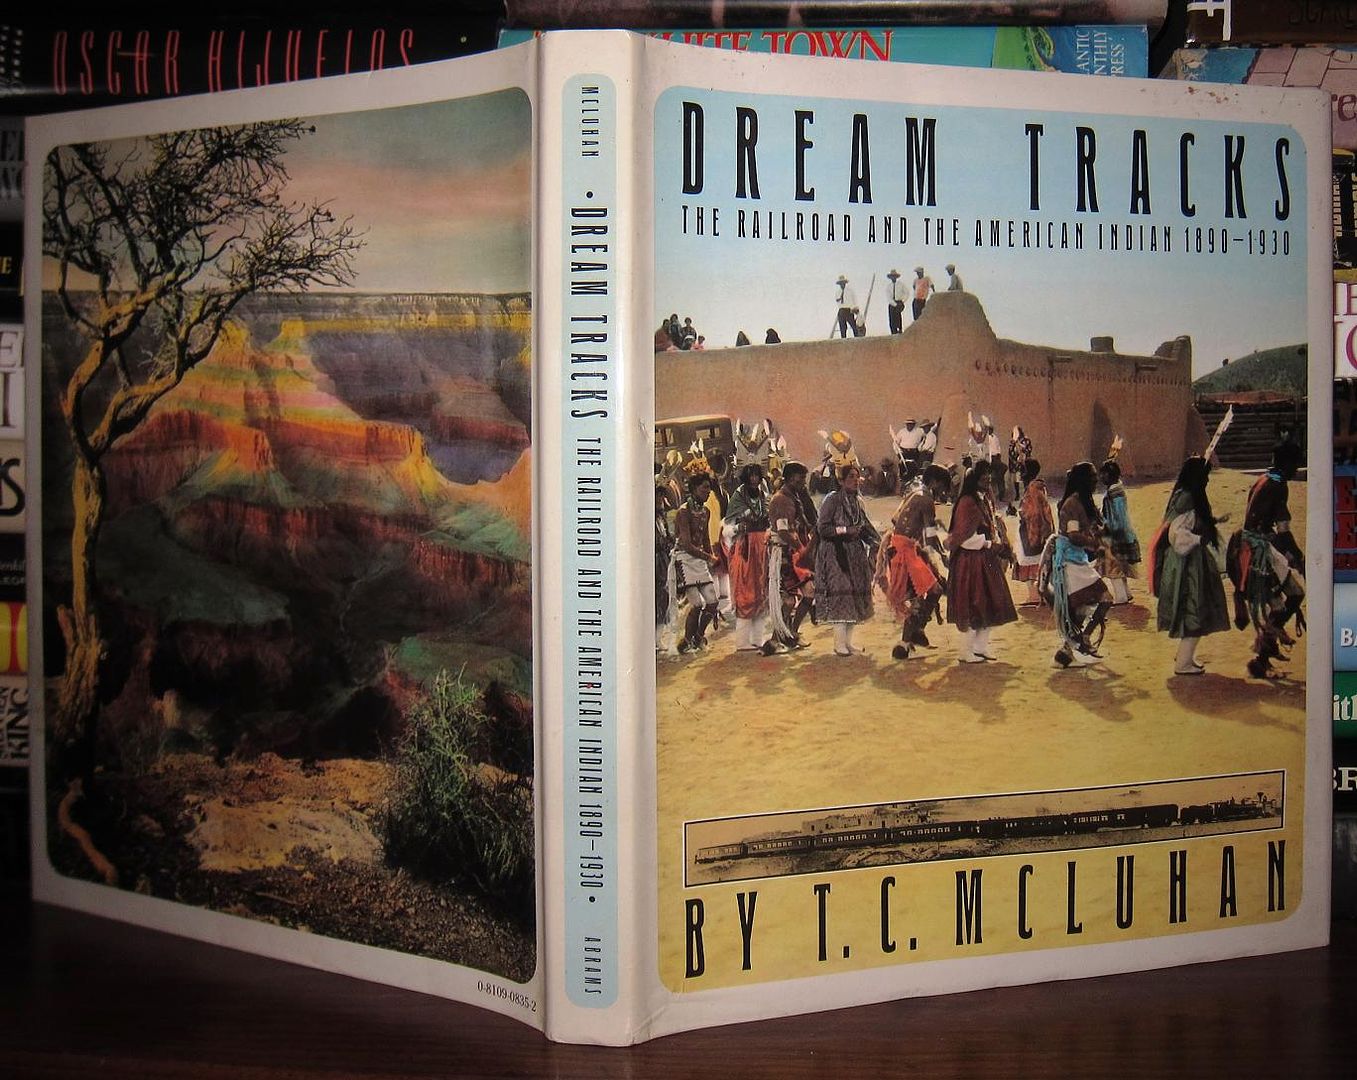 MCLUHAN, T. C. - Dream Tracks the Railroad and the American Indian 1890-1930